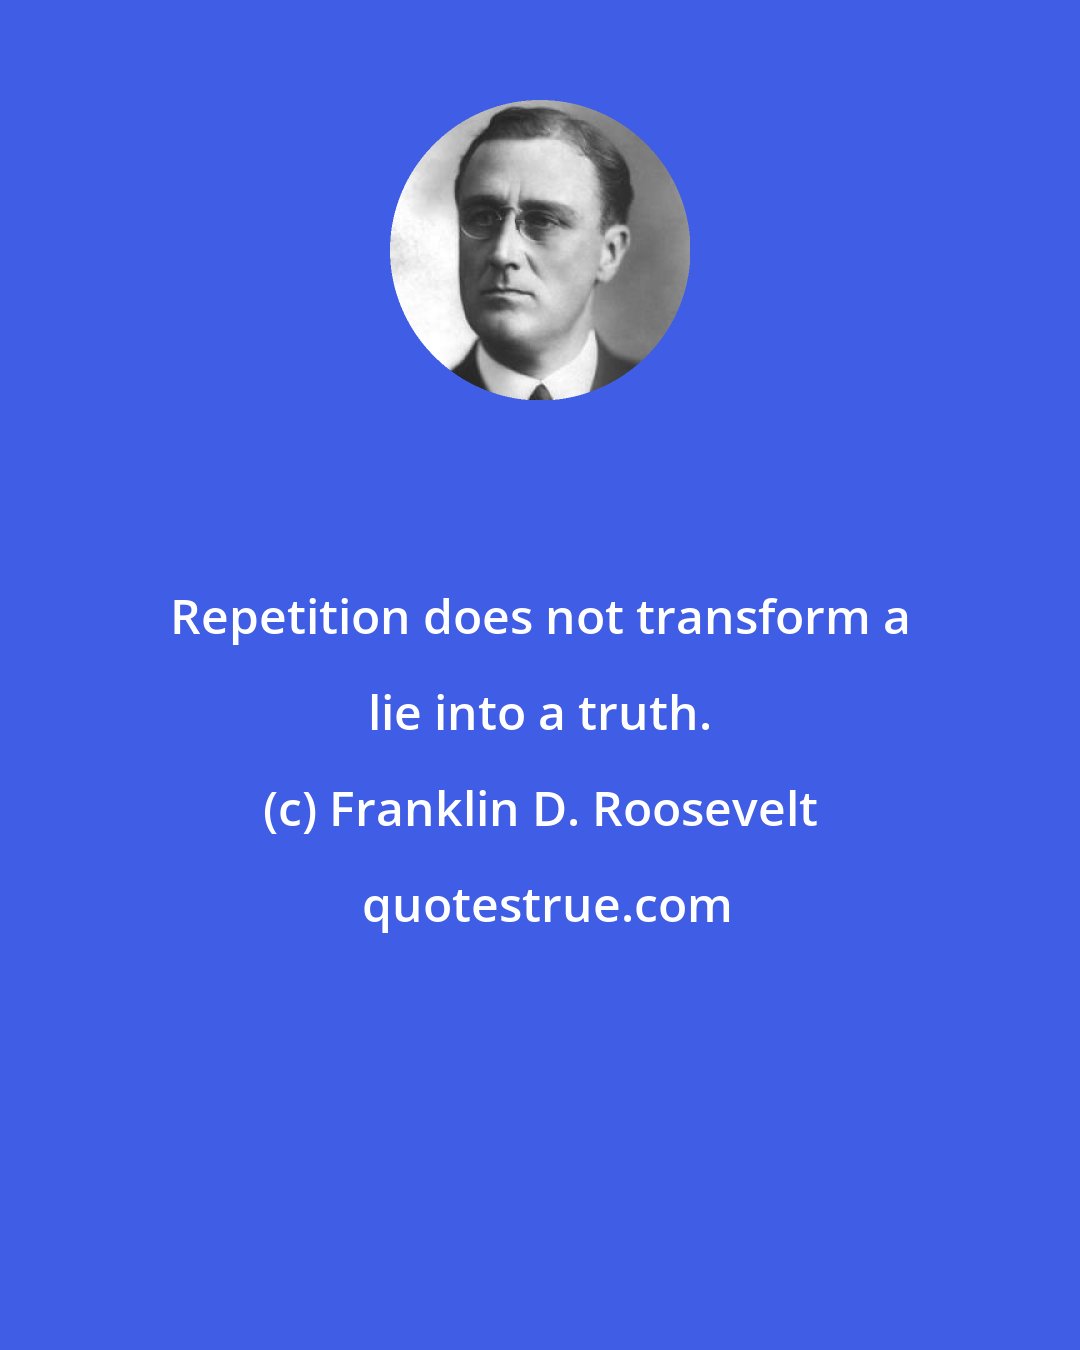 Franklin D. Roosevelt: Repetition does not transform a lie into a truth.